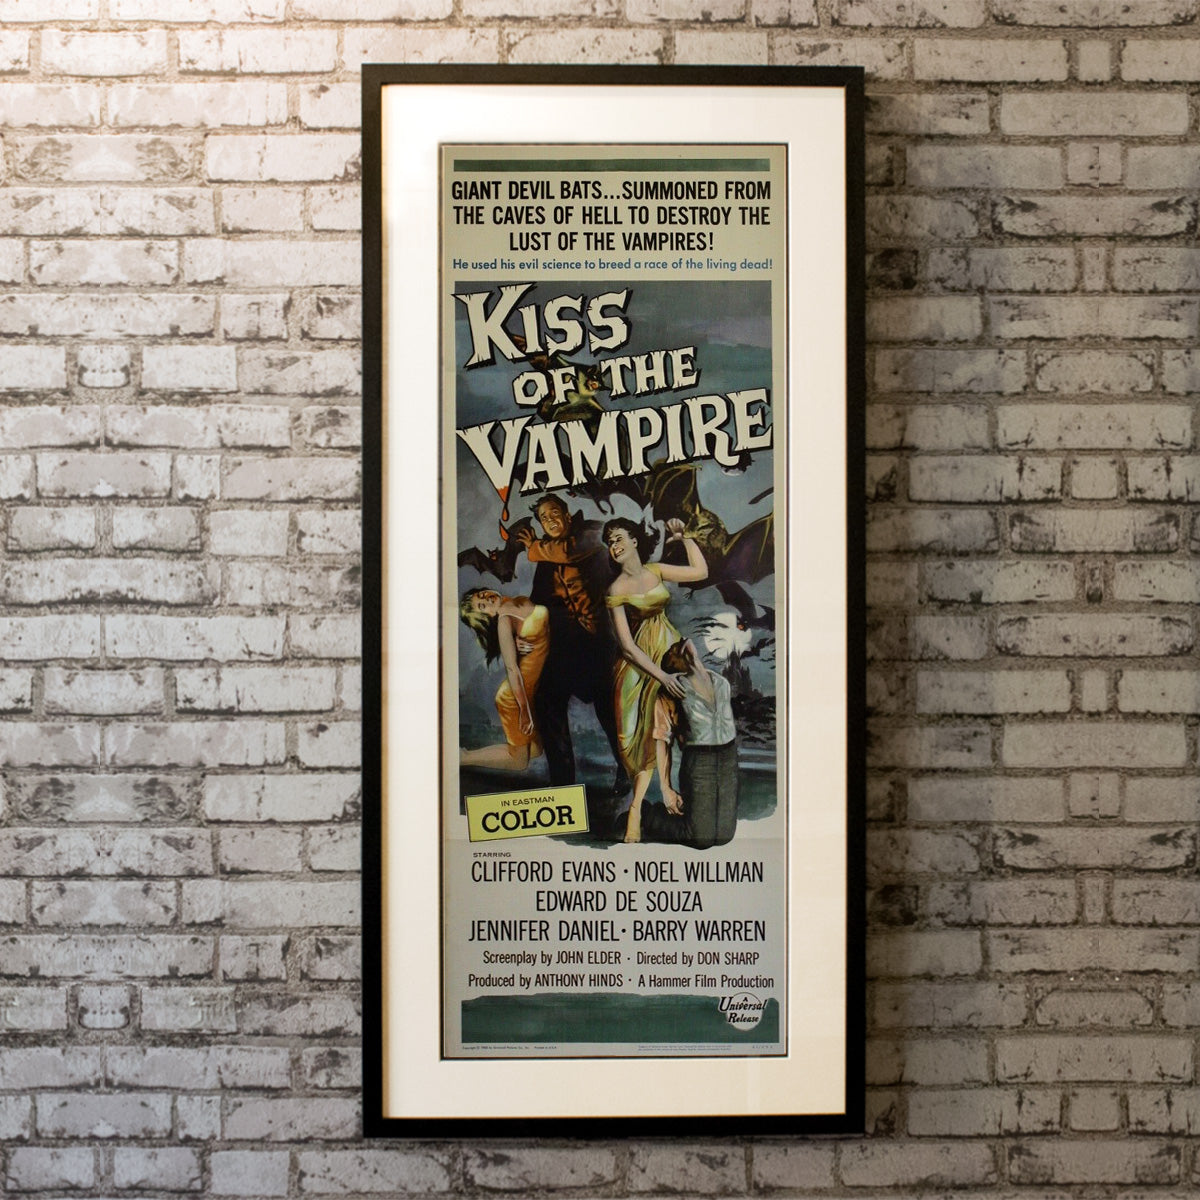 Kiss of The Vampire, The (1963)